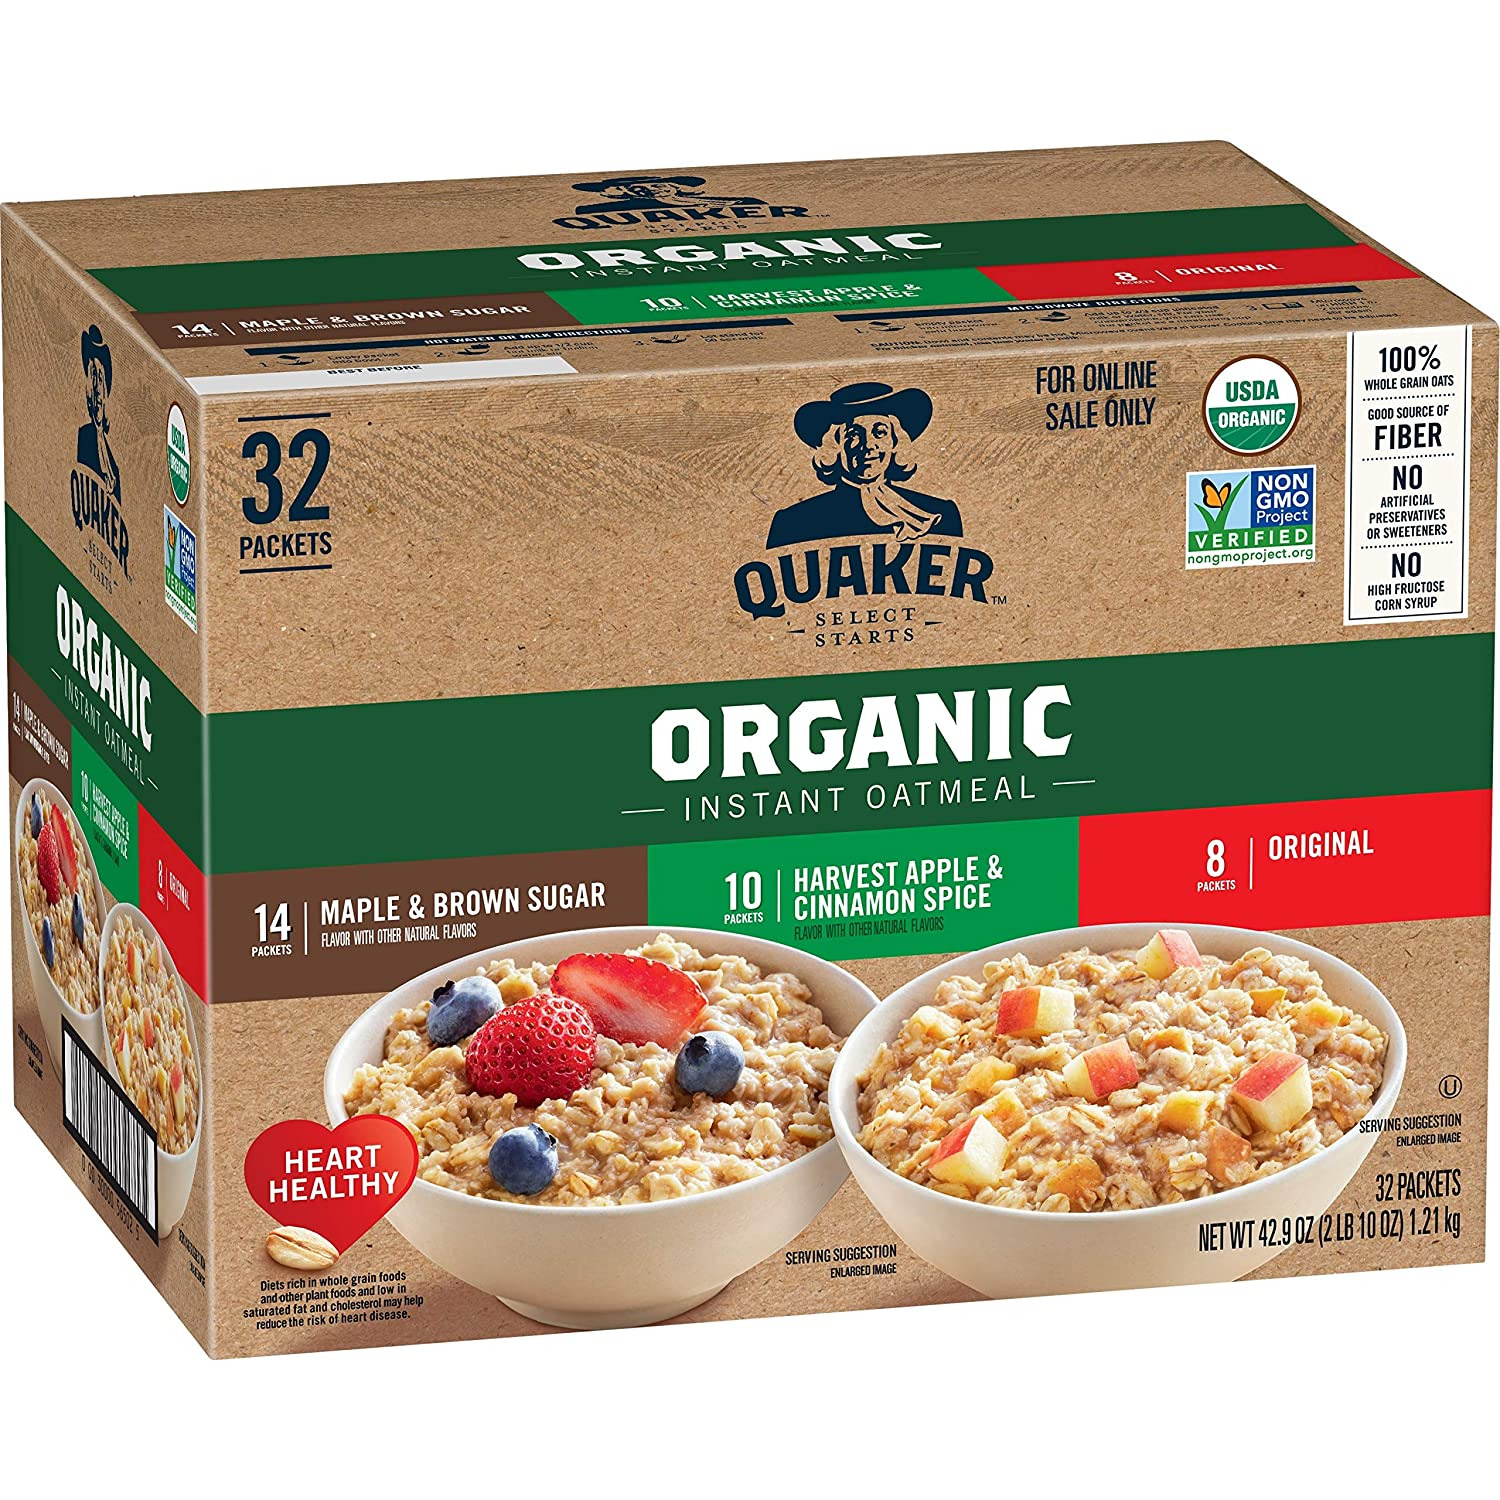 New QUAKER Instant Oatmeal, USDA Organic, 3 Flavor Variety Pack, 32 Count